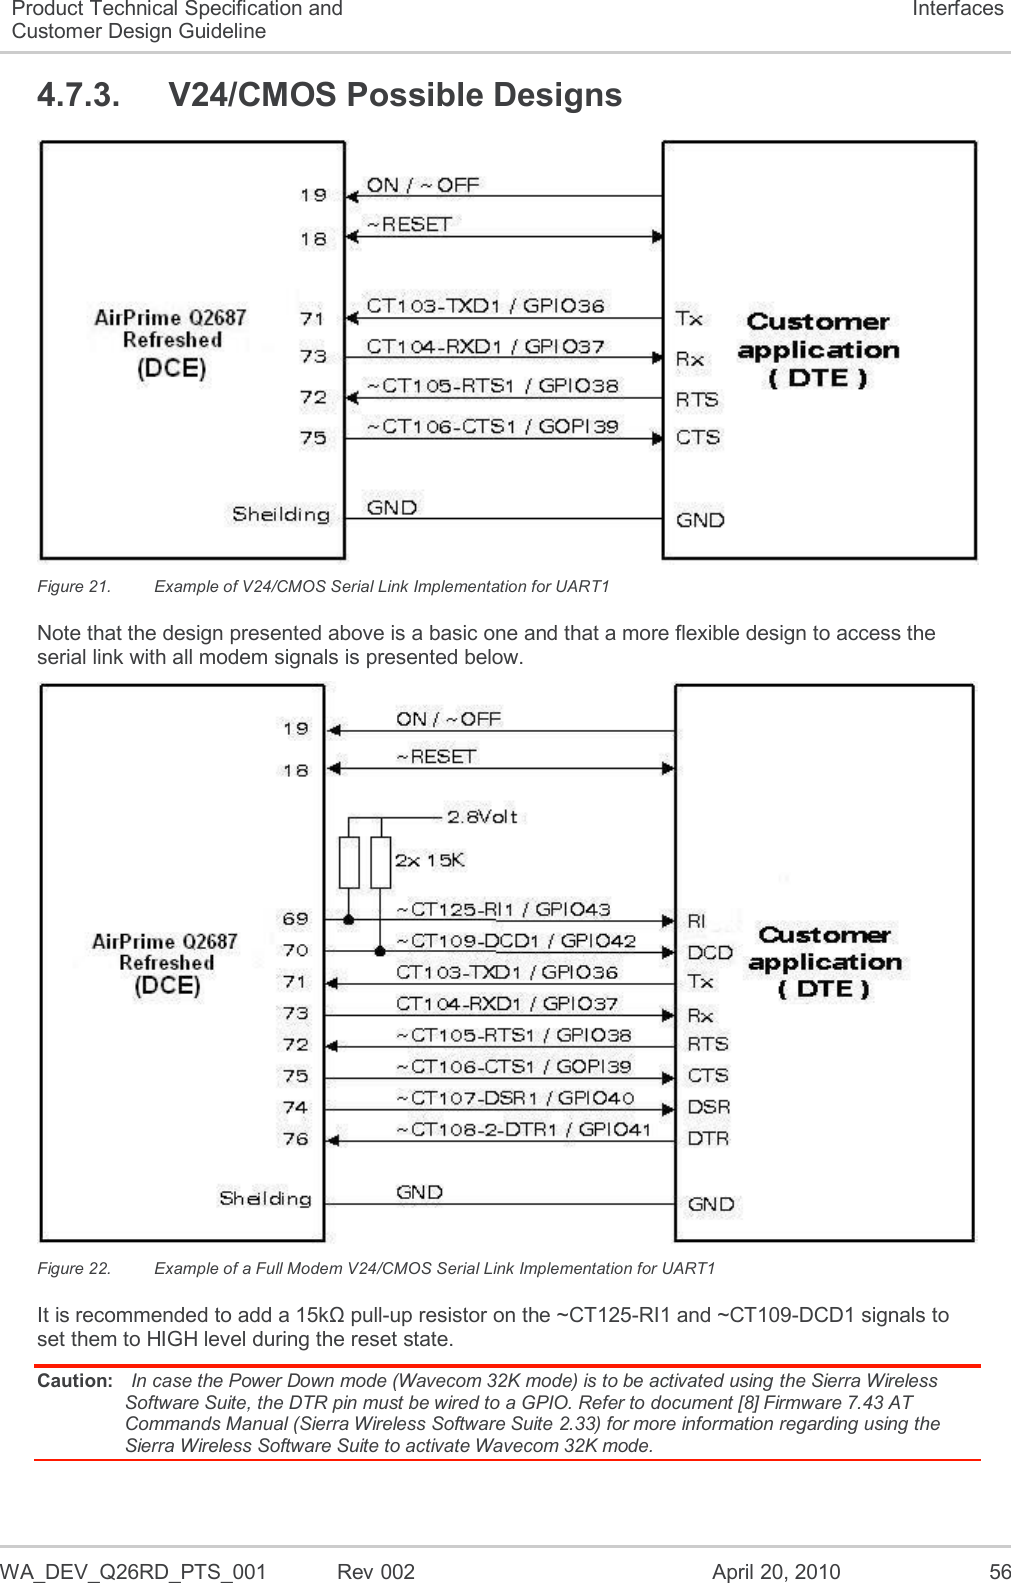  WA_DEV_Q26RD_PTS_001  Rev 002  April 20, 2010 56 Product Technical Specification and Customer Design Guideline Interfaces 4.7.3.  V24/CMOS Possible Designs  Figure 21.  Example of V24/CMOS Serial Link Implementation for UART1 Note that the design presented above is a basic one and that a more flexible design to access the serial link with all modem signals is presented below.  Figure 22.  Example of a Full Modem V24/CMOS Serial Link Implementation for UART1 It is recommended to add a 15kΩ pull-up resistor on the ~CT125-RI1 and ~CT109-DCD1 signals to set them to HIGH level during the reset state. Caution:  In case the Power Down mode (Wavecom 32K mode) is to be activated using the Sierra Wireless Software Suite, the DTR pin must be wired to a GPIO. Refer to document [8] Firmware 7.43 AT Commands Manual (Sierra Wireless Software Suite 2.33) for more information regarding using the Sierra Wireless Software Suite to activate Wavecom 32K mode. 